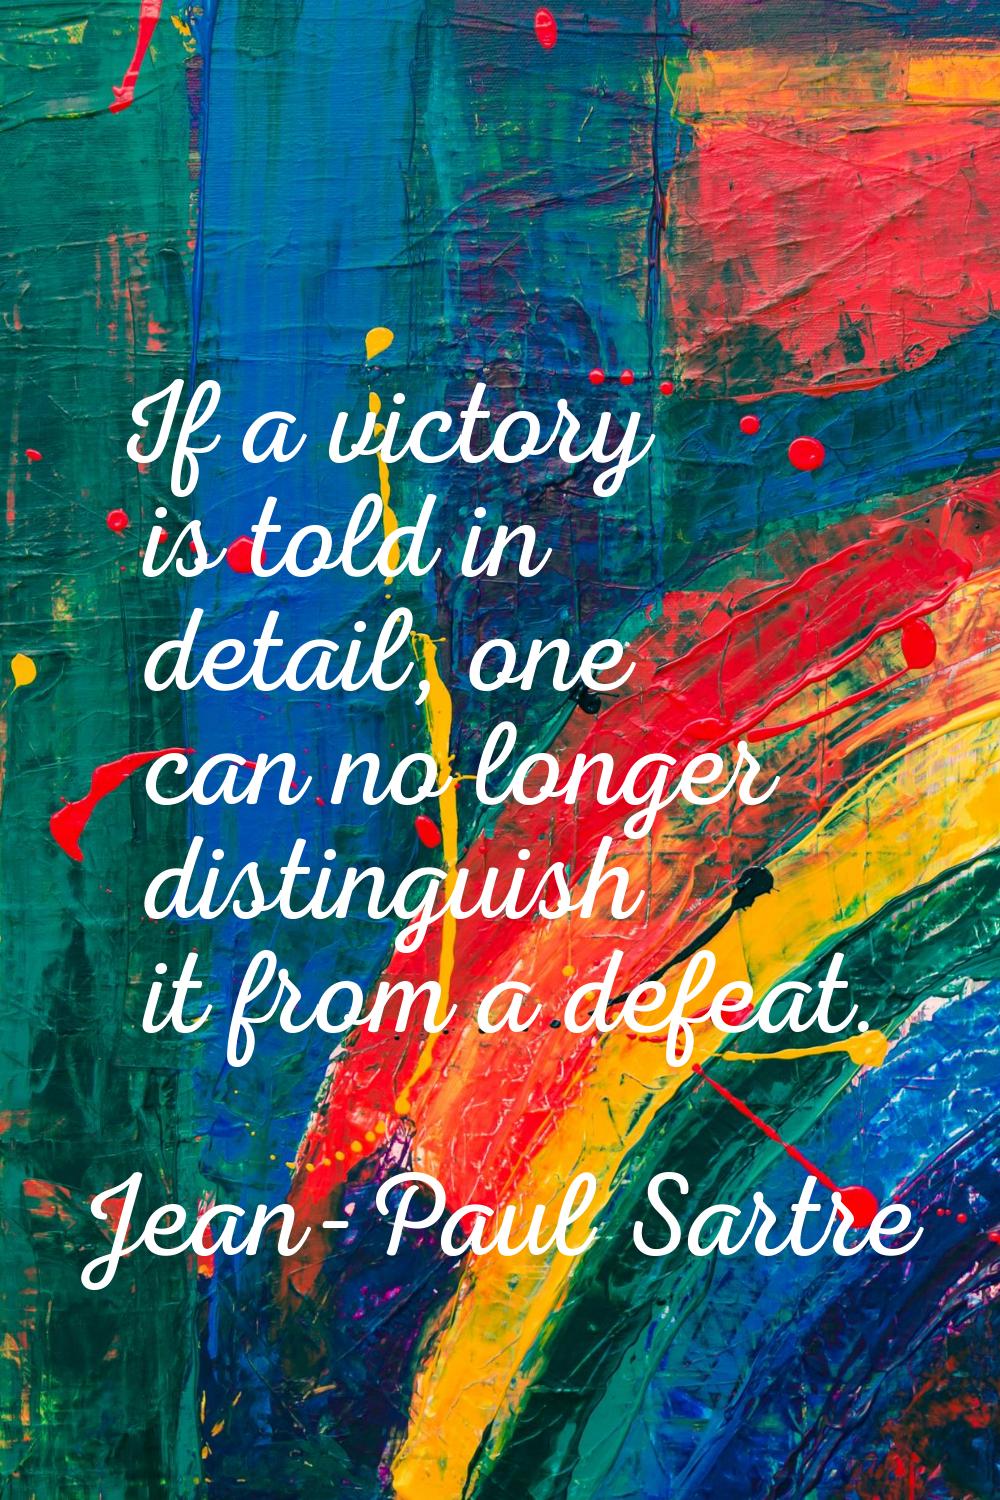 If a victory is told in detail, one can no longer distinguish it from a defeat.